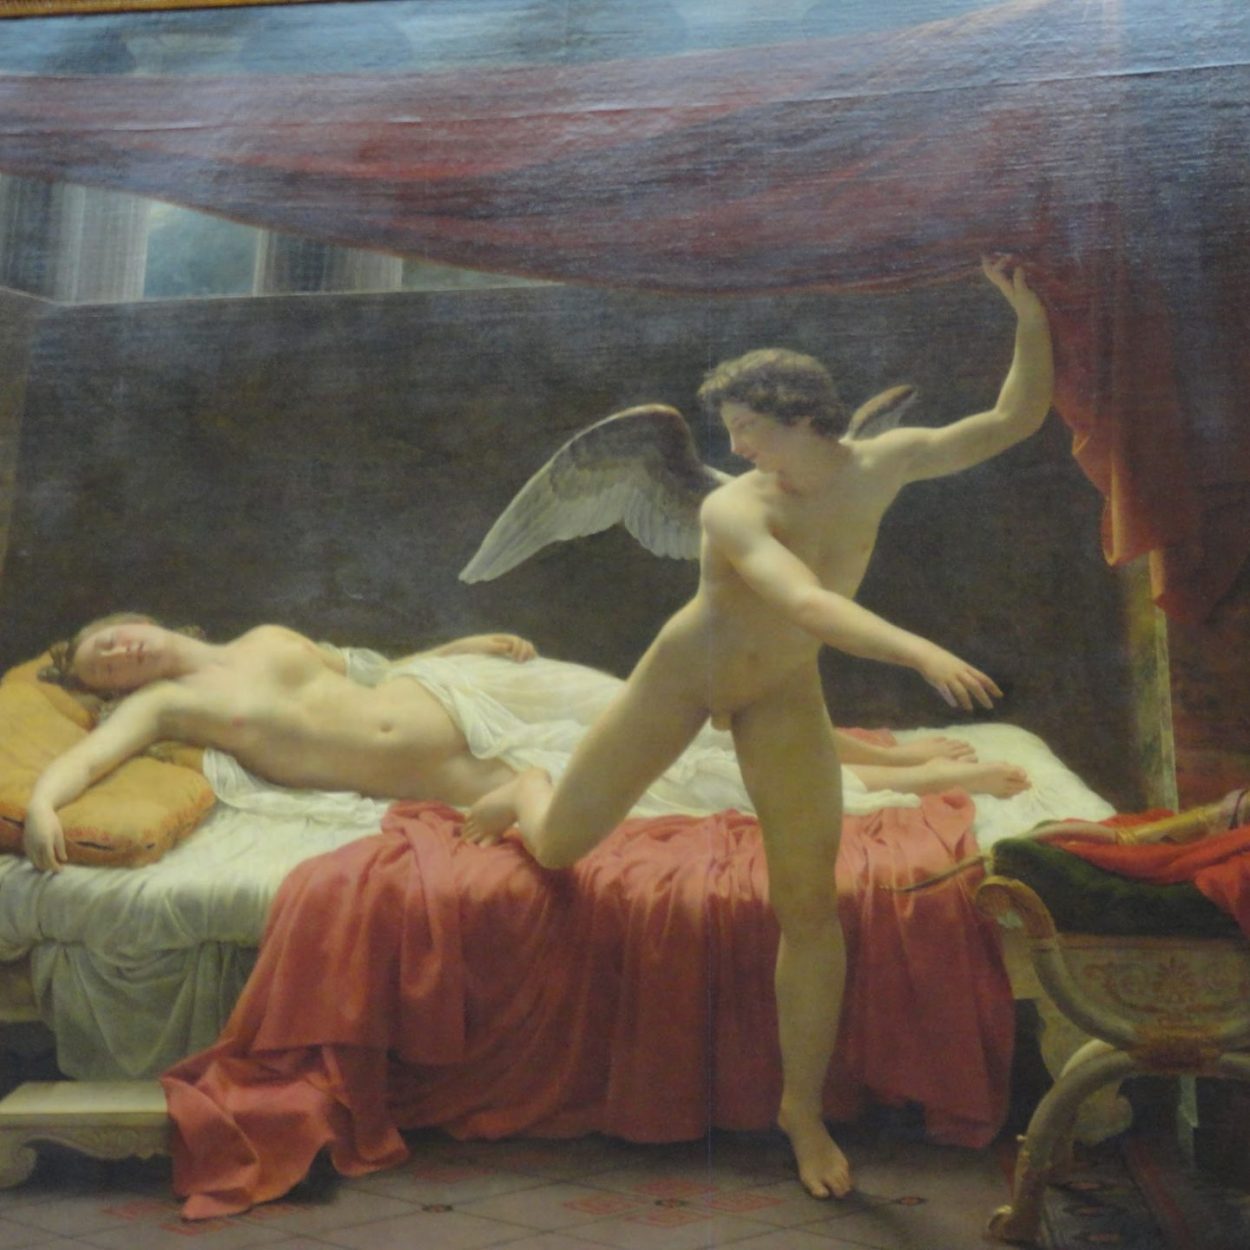 One of the paintings in the art gallery in the Louvre.